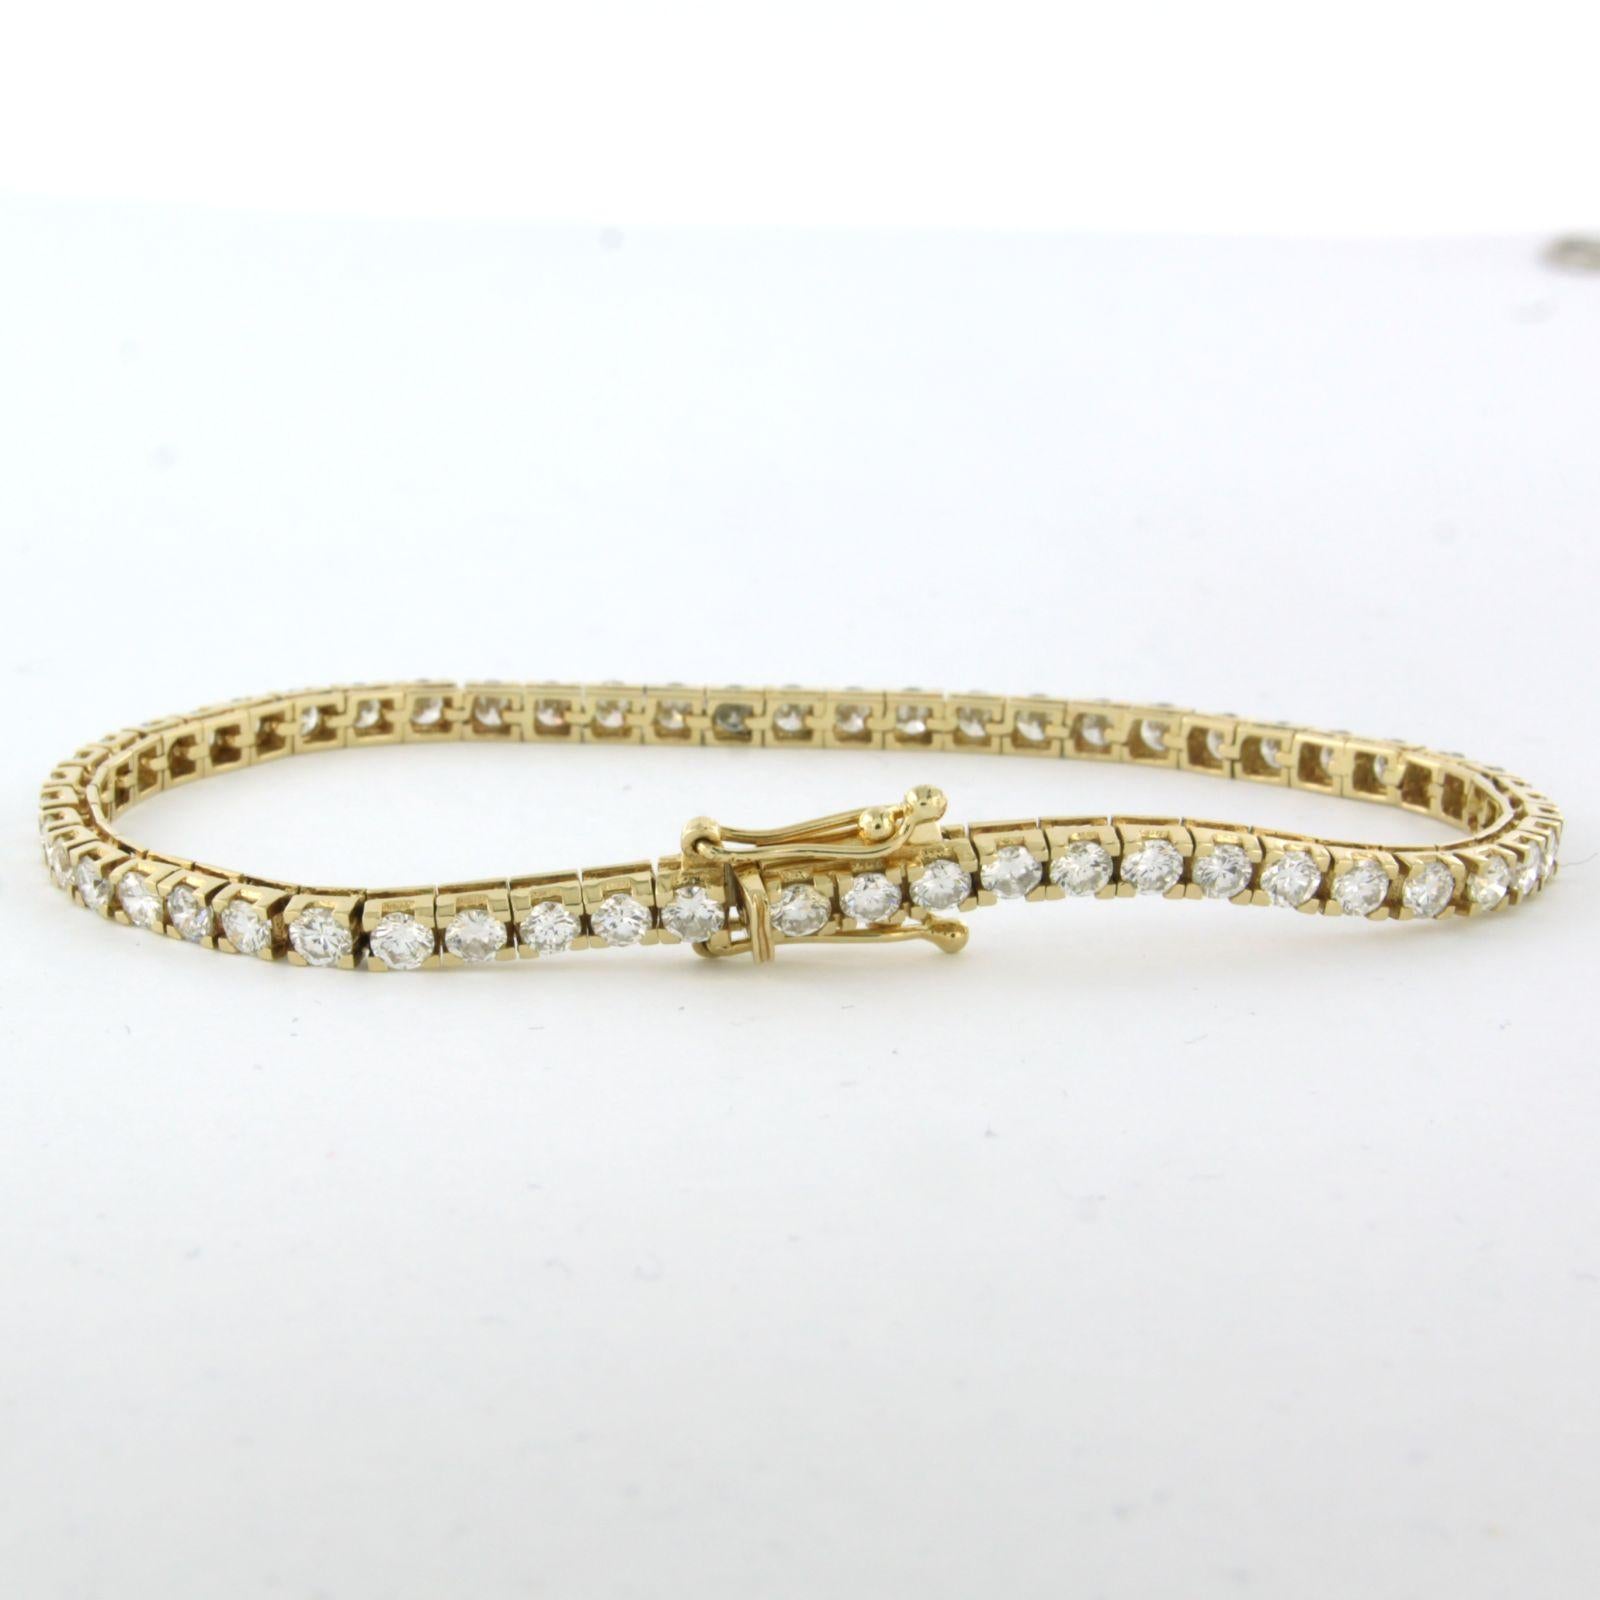 14k yellow gold bracelet with brilliant cut diamond 5.05ct F/G VS/SI - length 19 cm

Detailed description

the front of the bracelet is 3.0 mm high and 3.0 mm wide

Length of the bracelet is 19 cm

Total weight: 10.3 grams

occupied with:

- 56 x